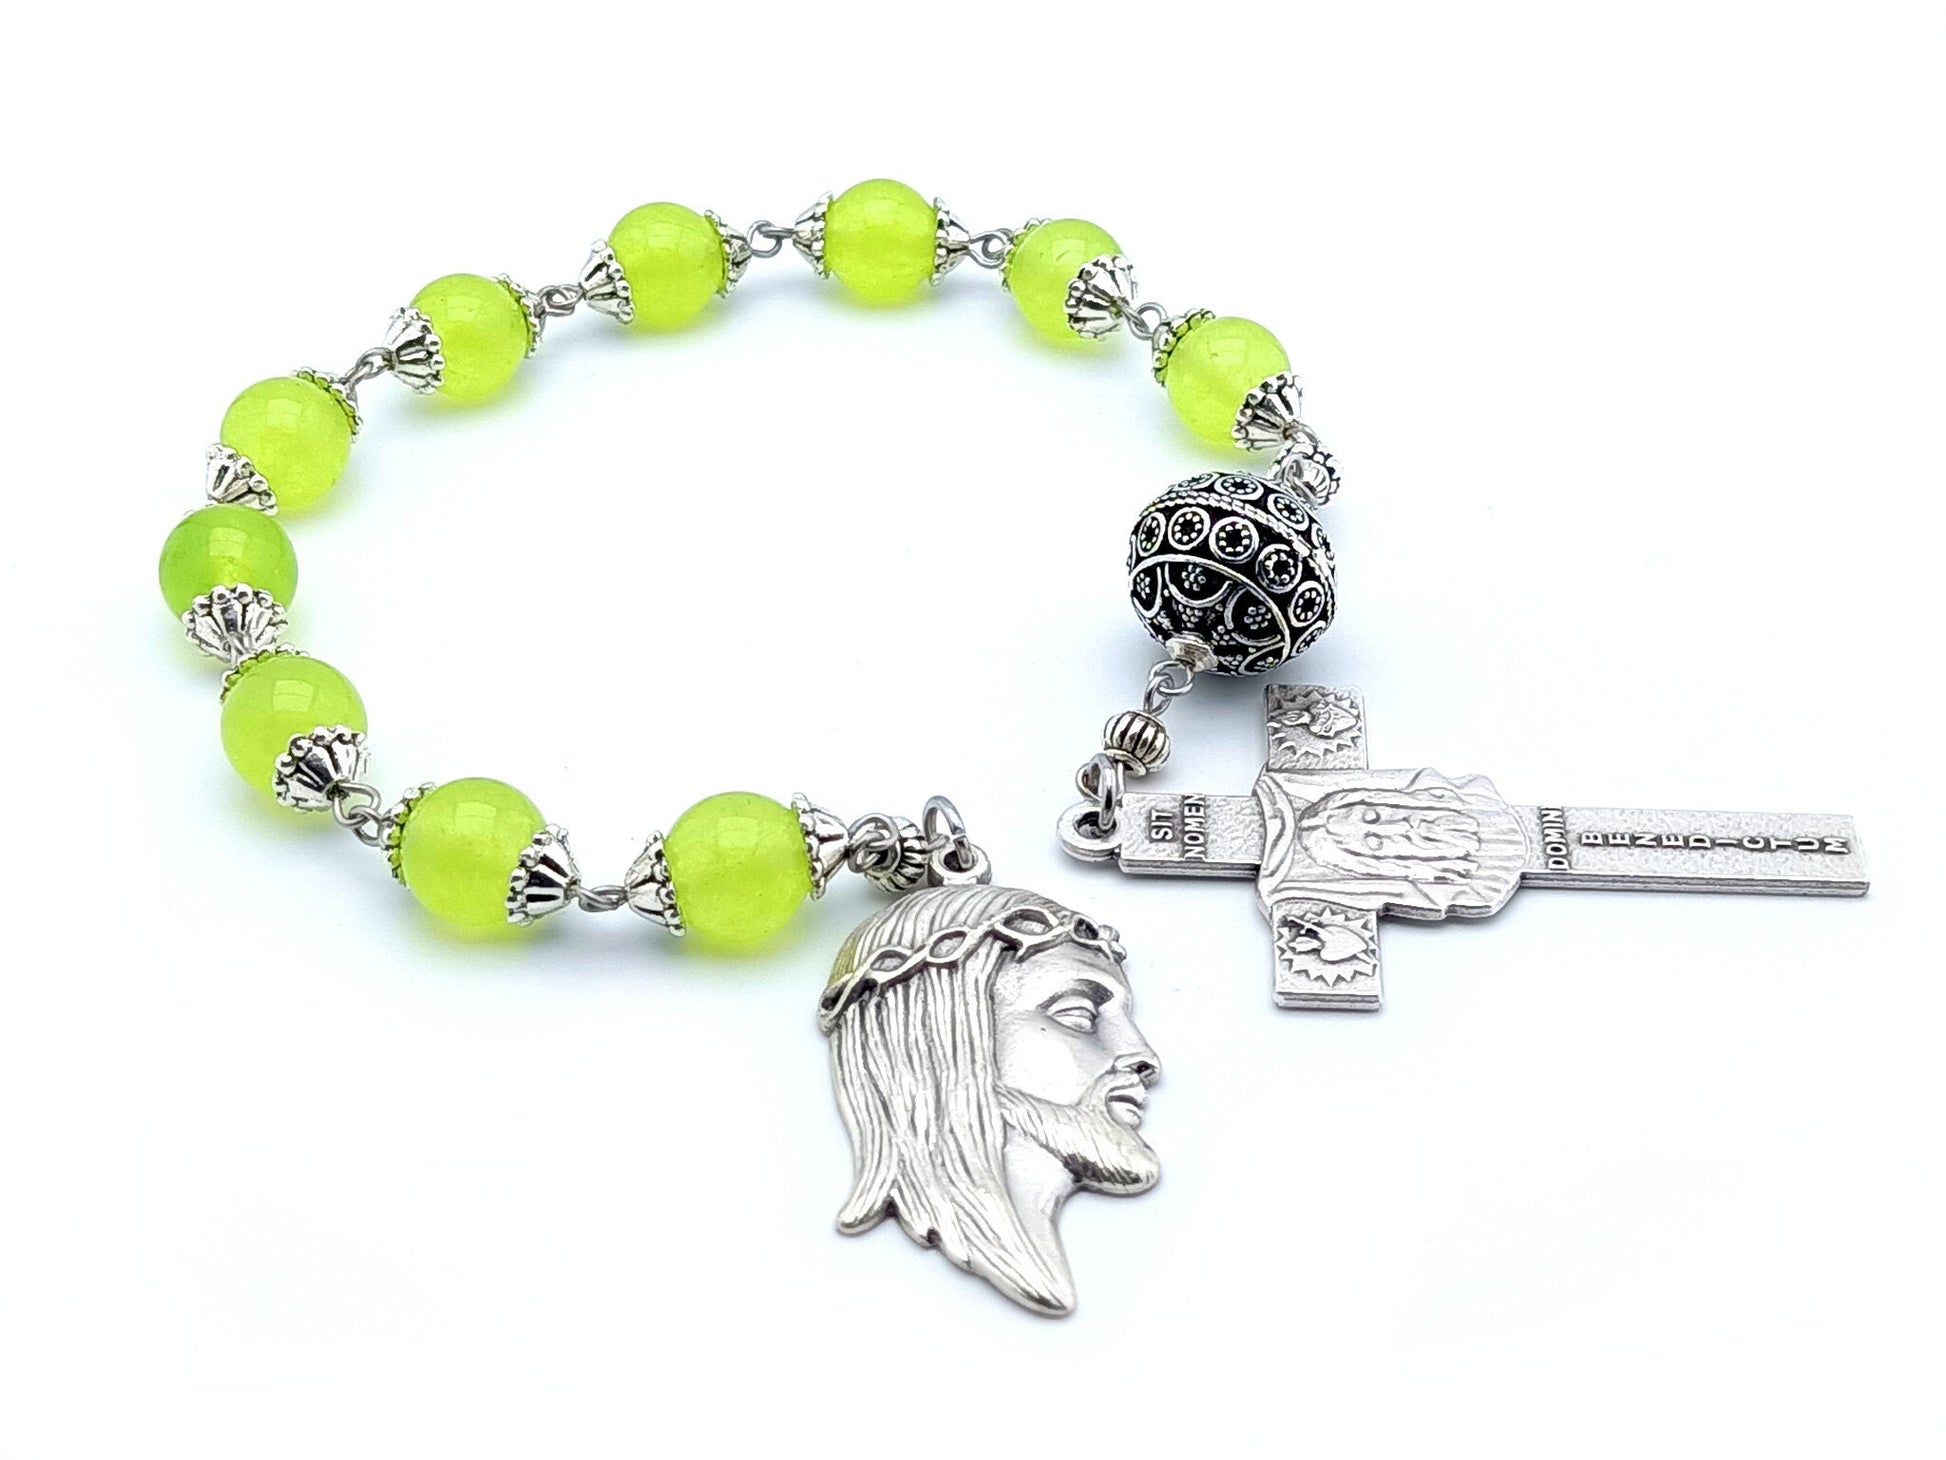 Holy Face of Jesus unique rosary beads single decade tenner rosary with peridot gemstone beads, silver pater bead, crucifix and Holy face medal.